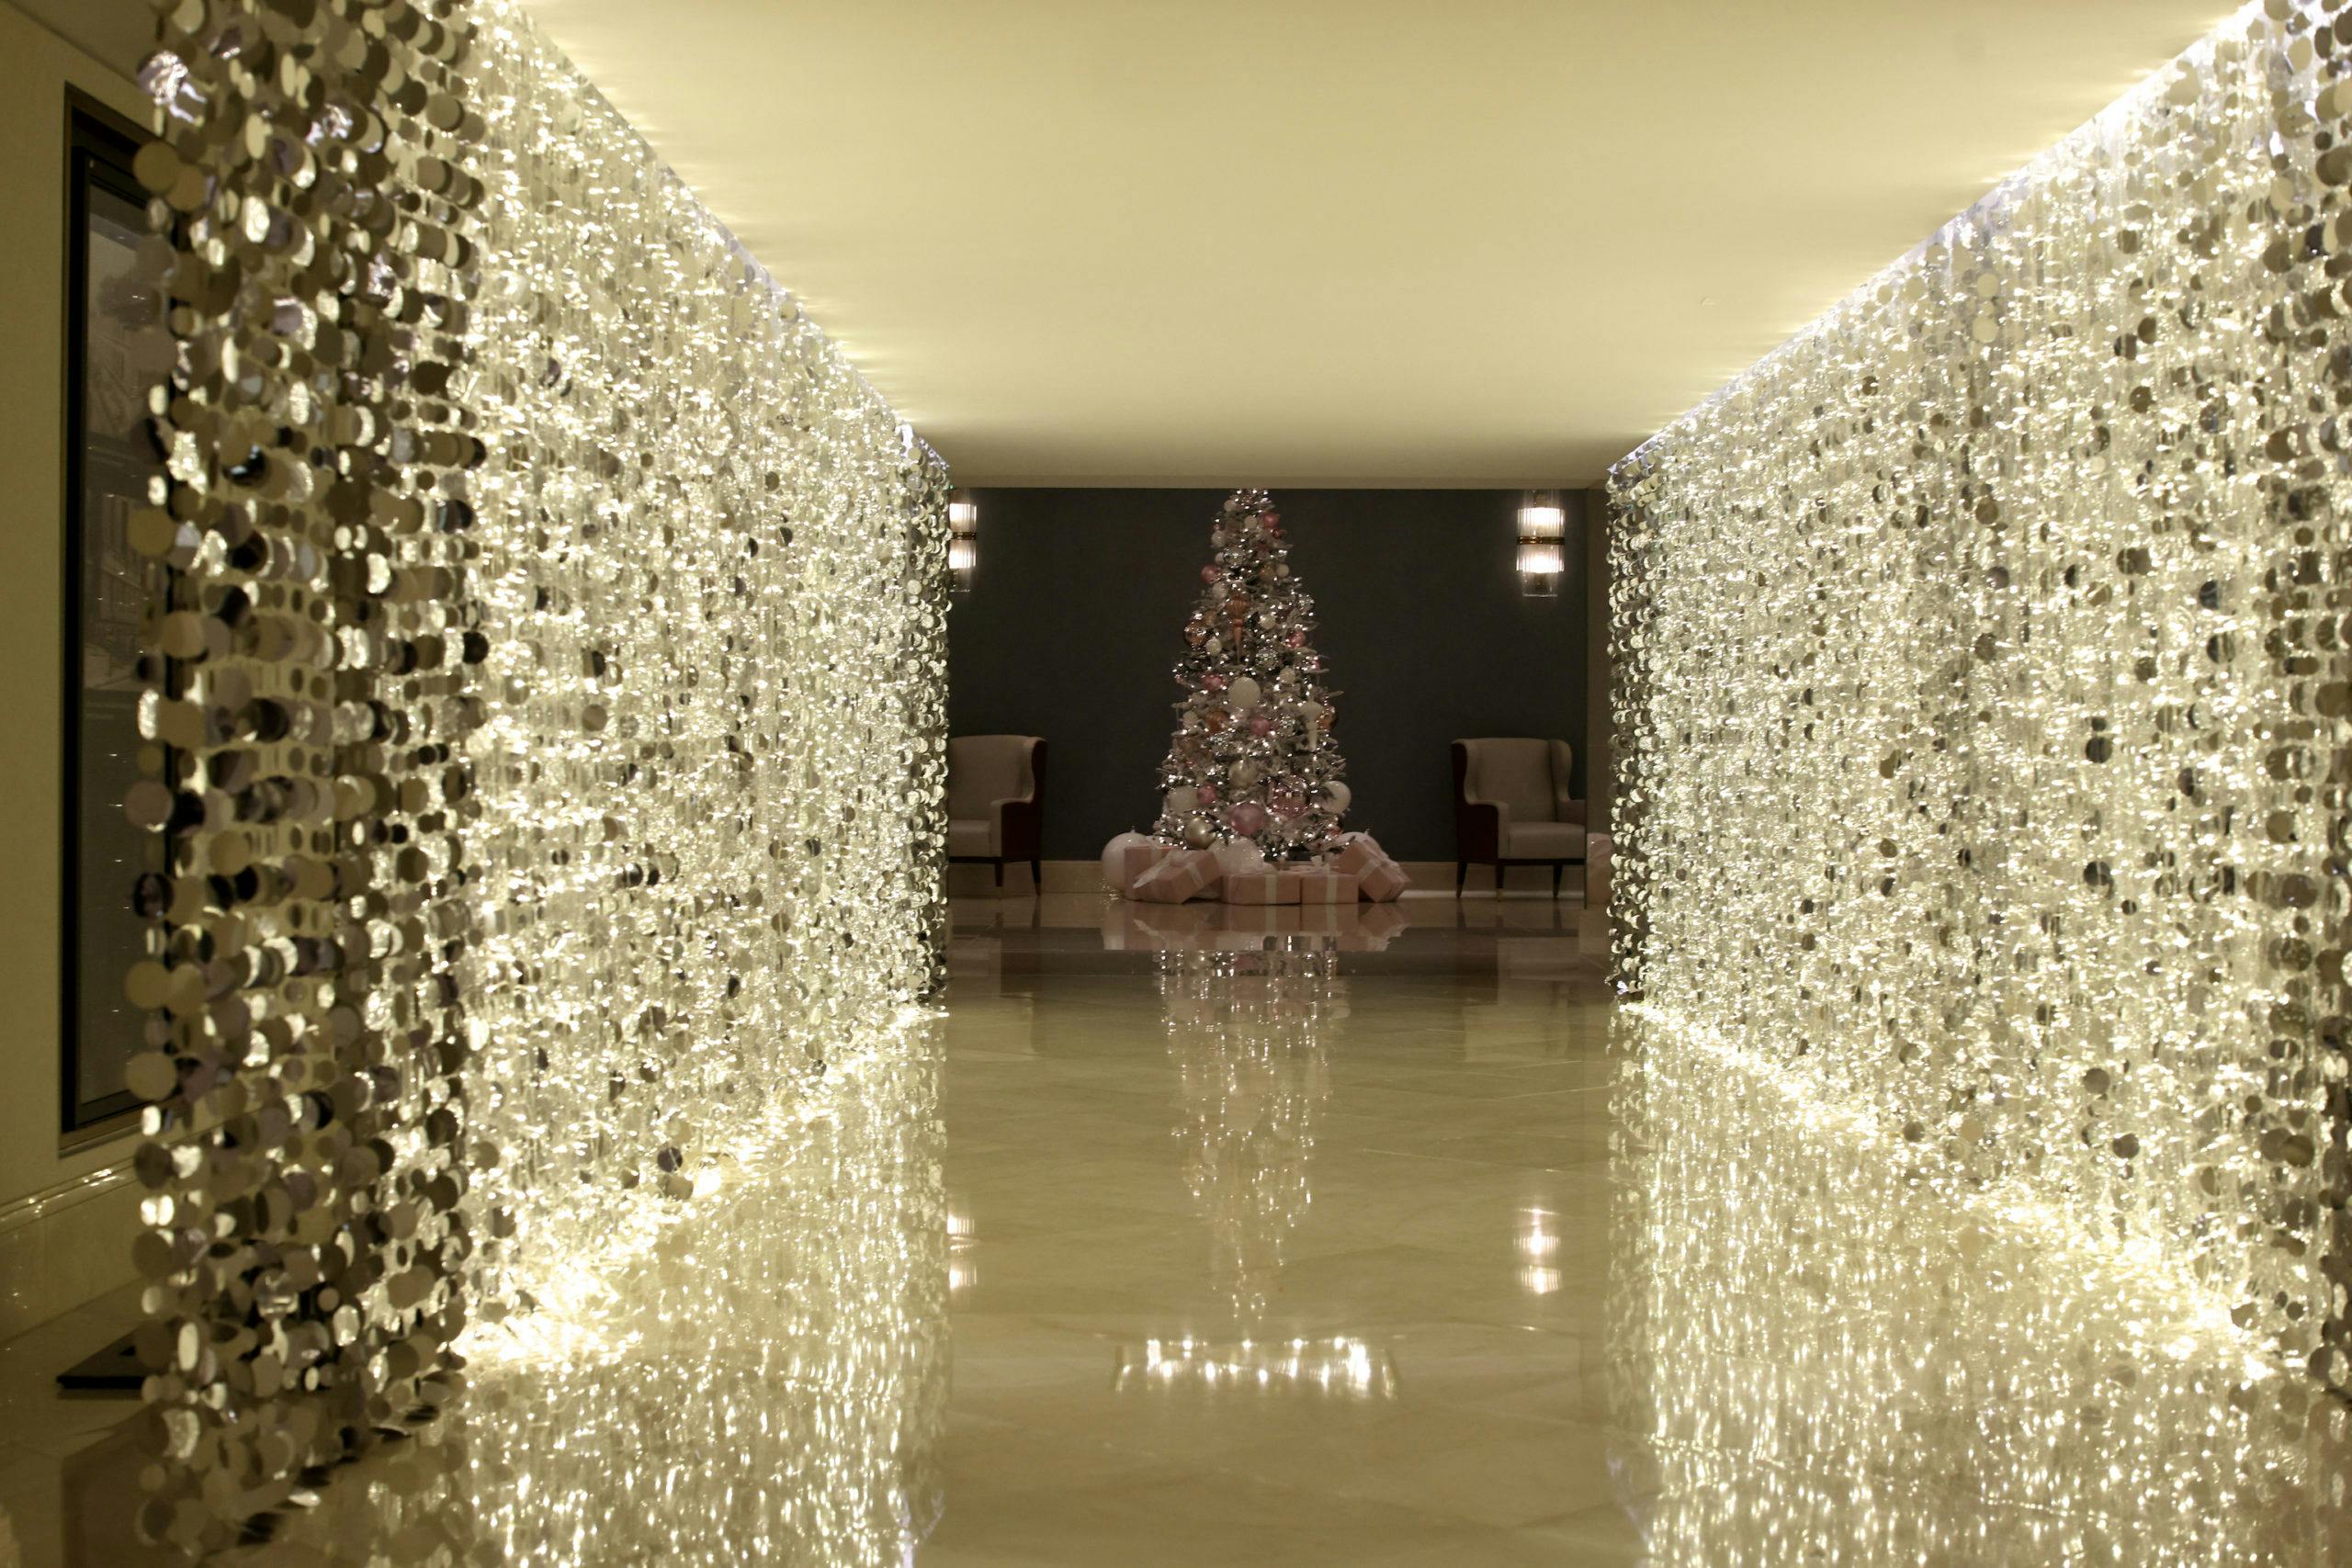 Twinkling light entrance to holiday party with Christmas tree decked in gold, a top winter party idea.